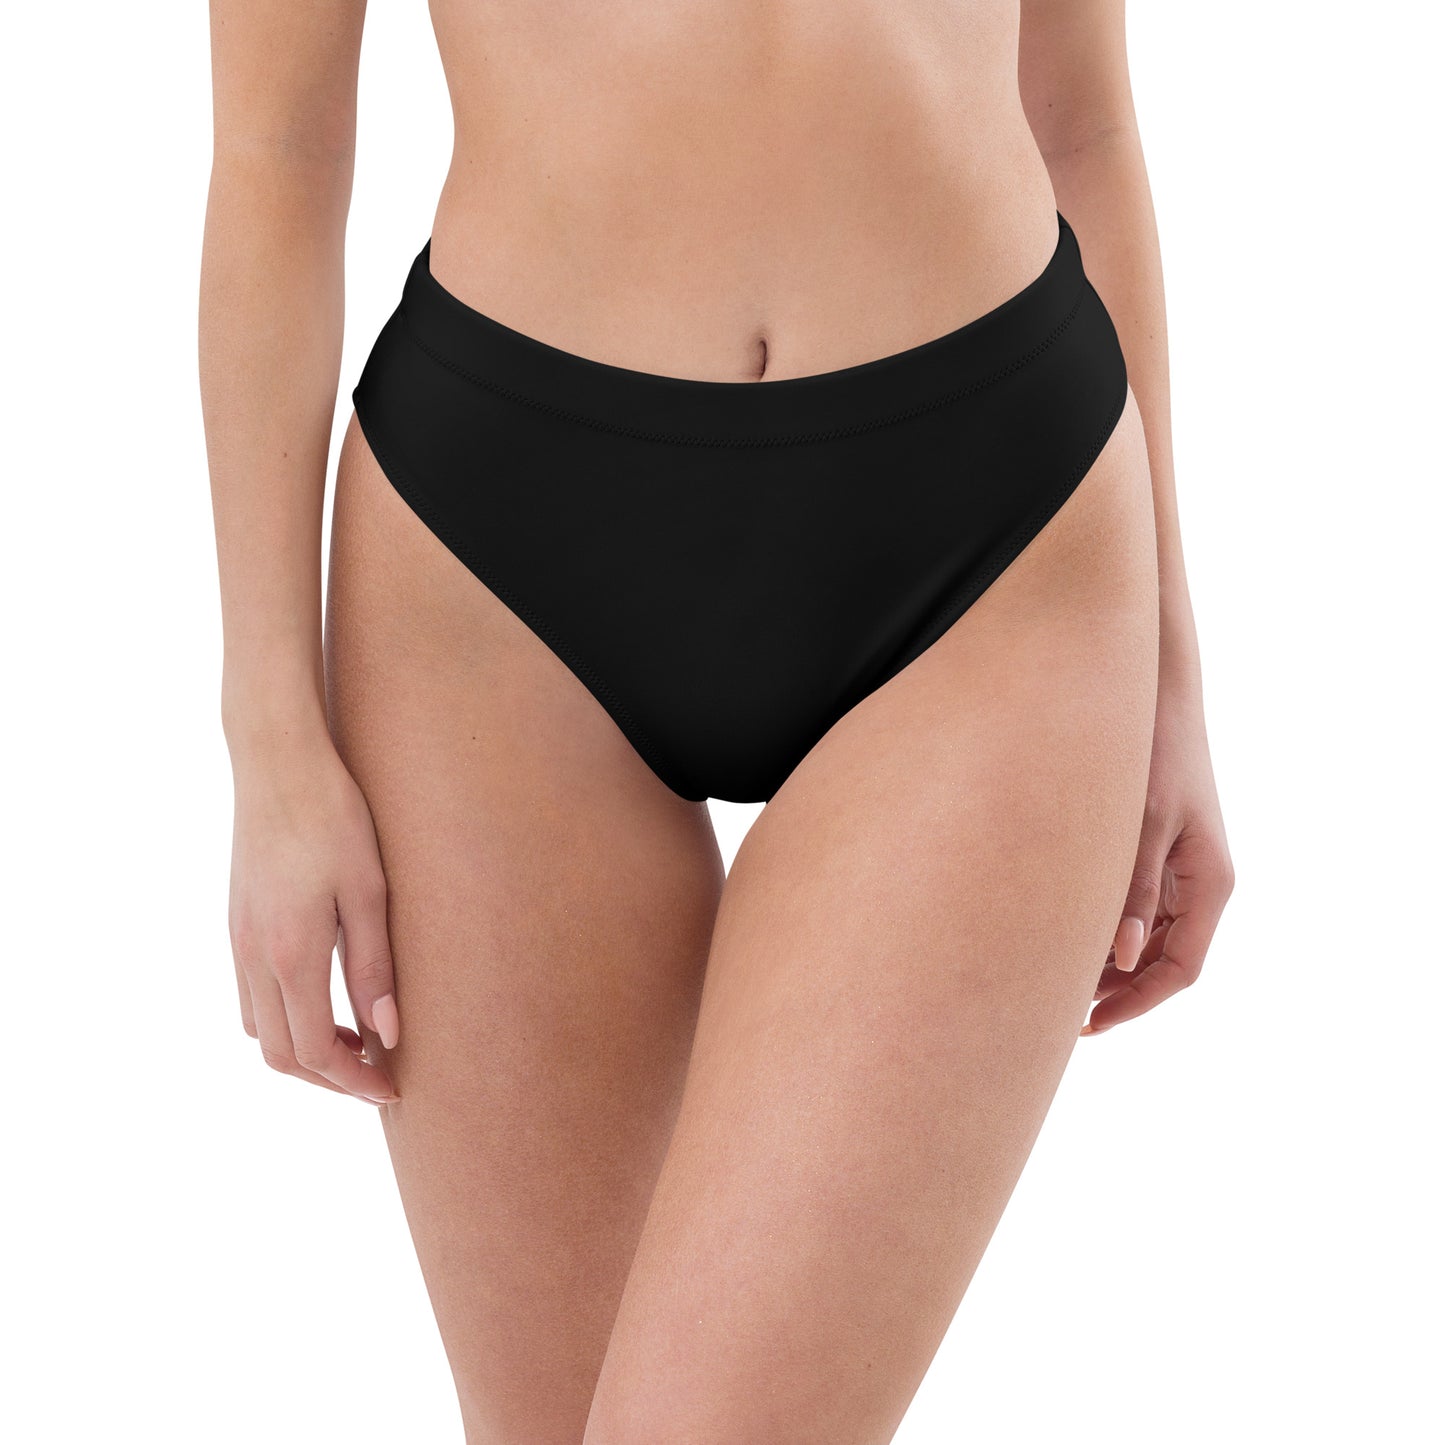 Our Classic Black High-Waisted High-Cut Tucking Panty